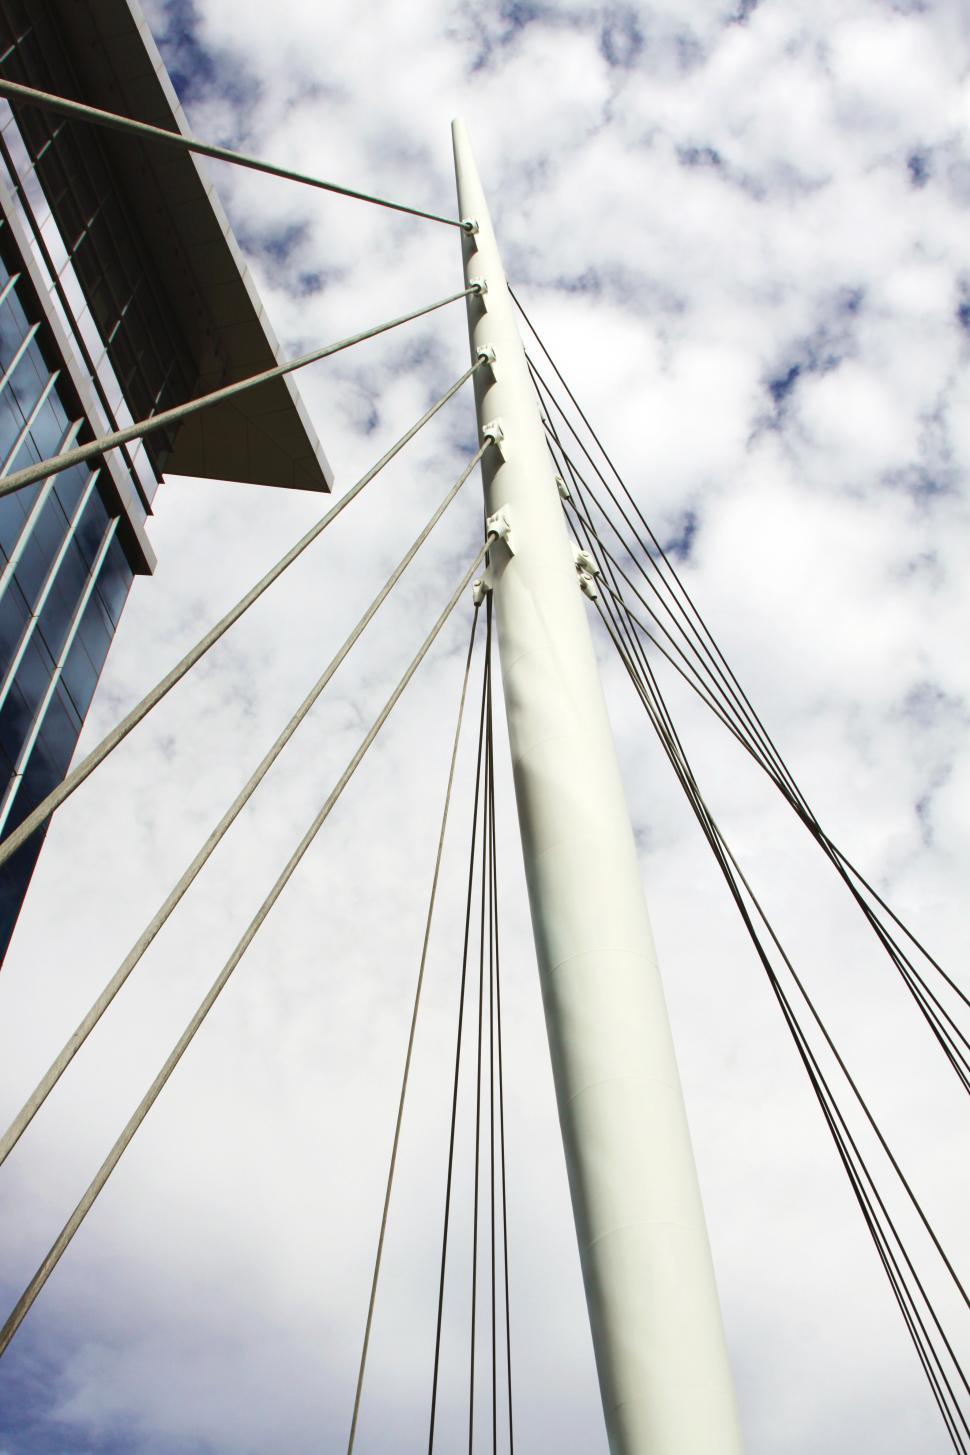 Free Image of Bridge cables and building with white clouds 